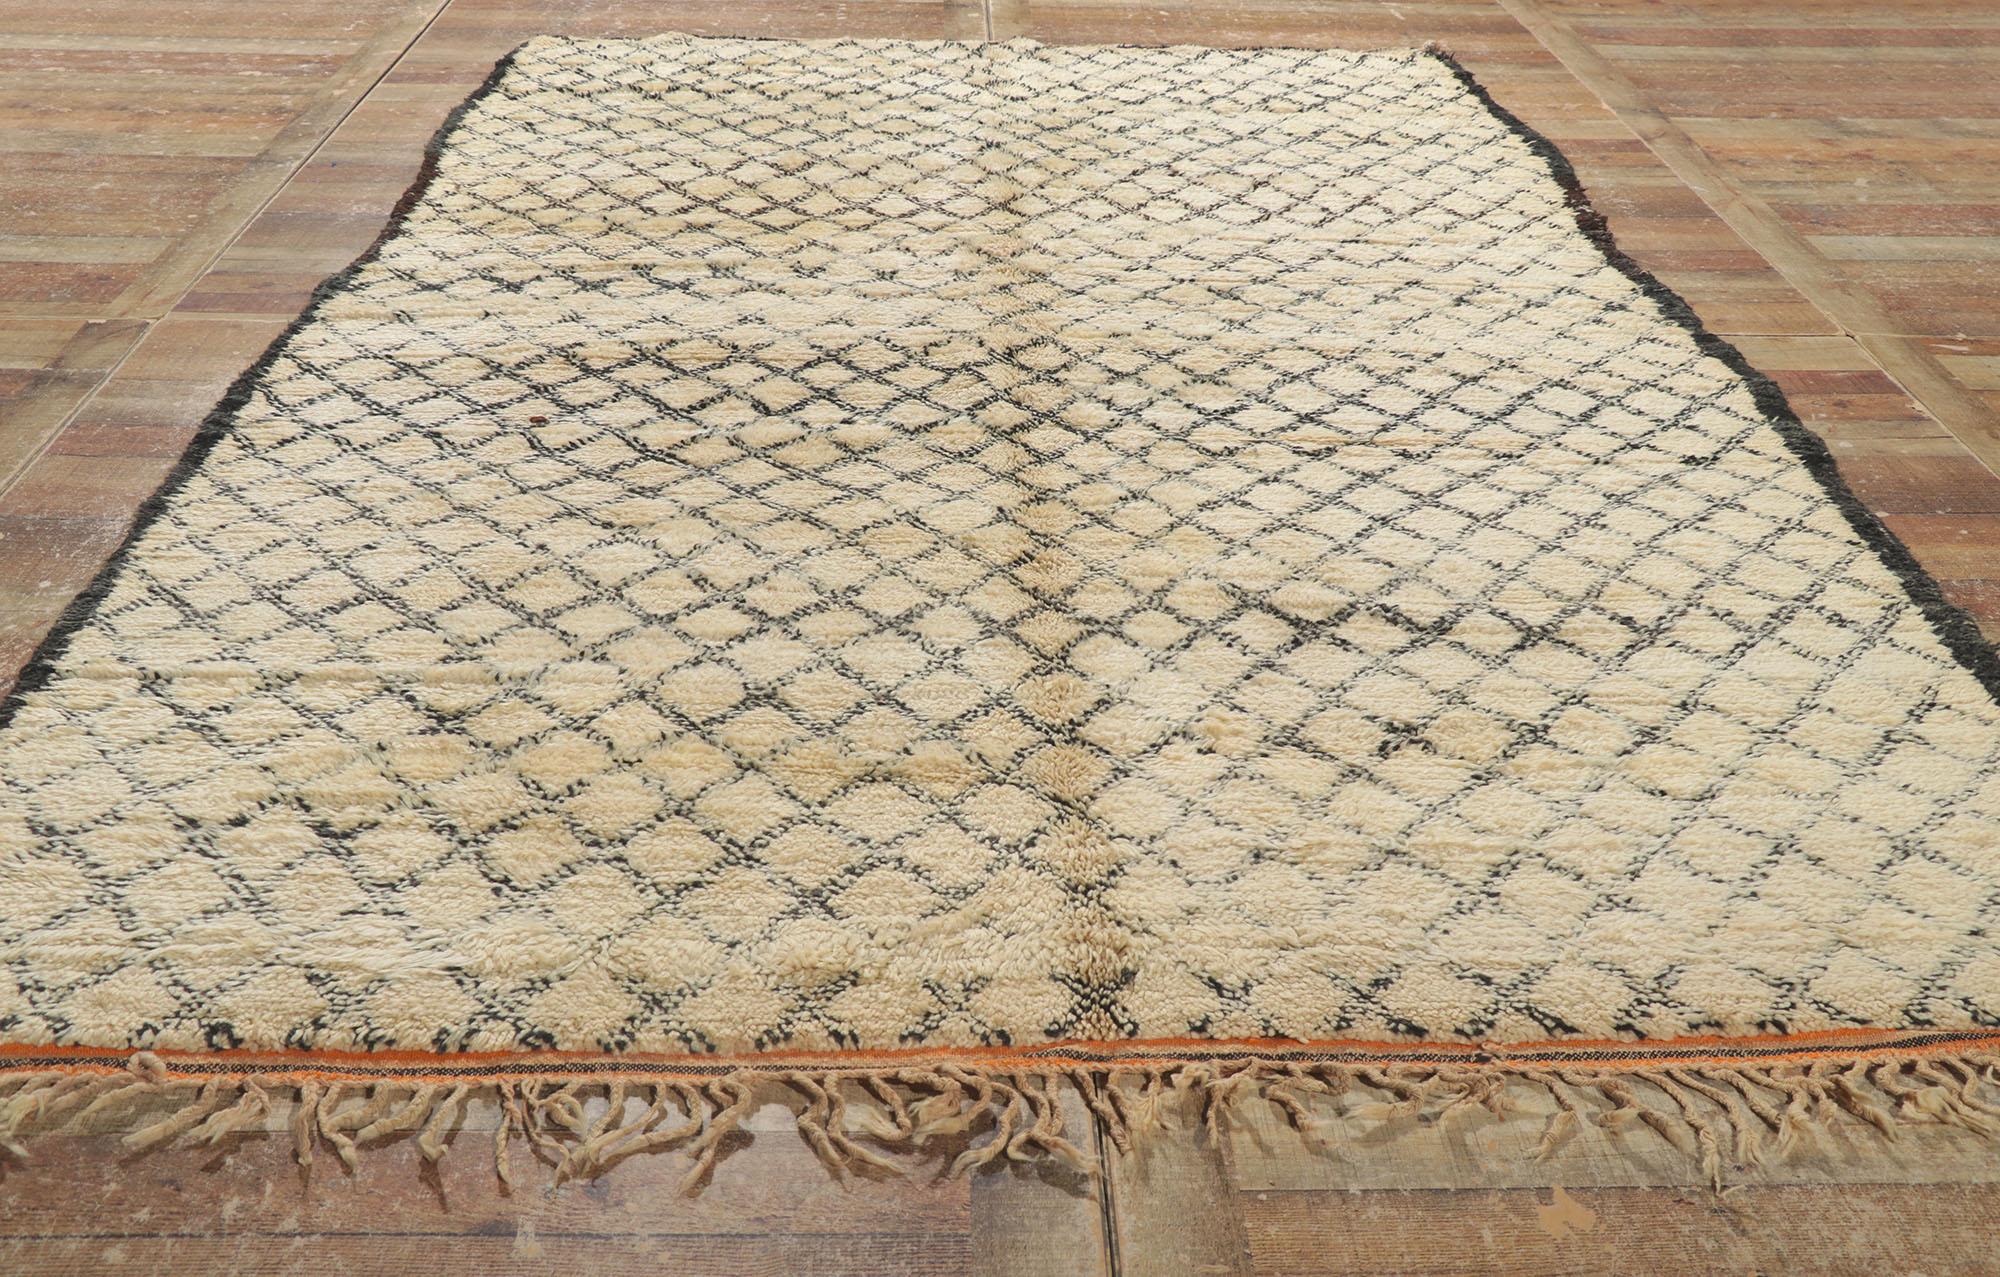 Wool Vintage Moroccan Beni Ourain Rug, Cozy Boho Nomad Meets Midcentury Modern Style For Sale